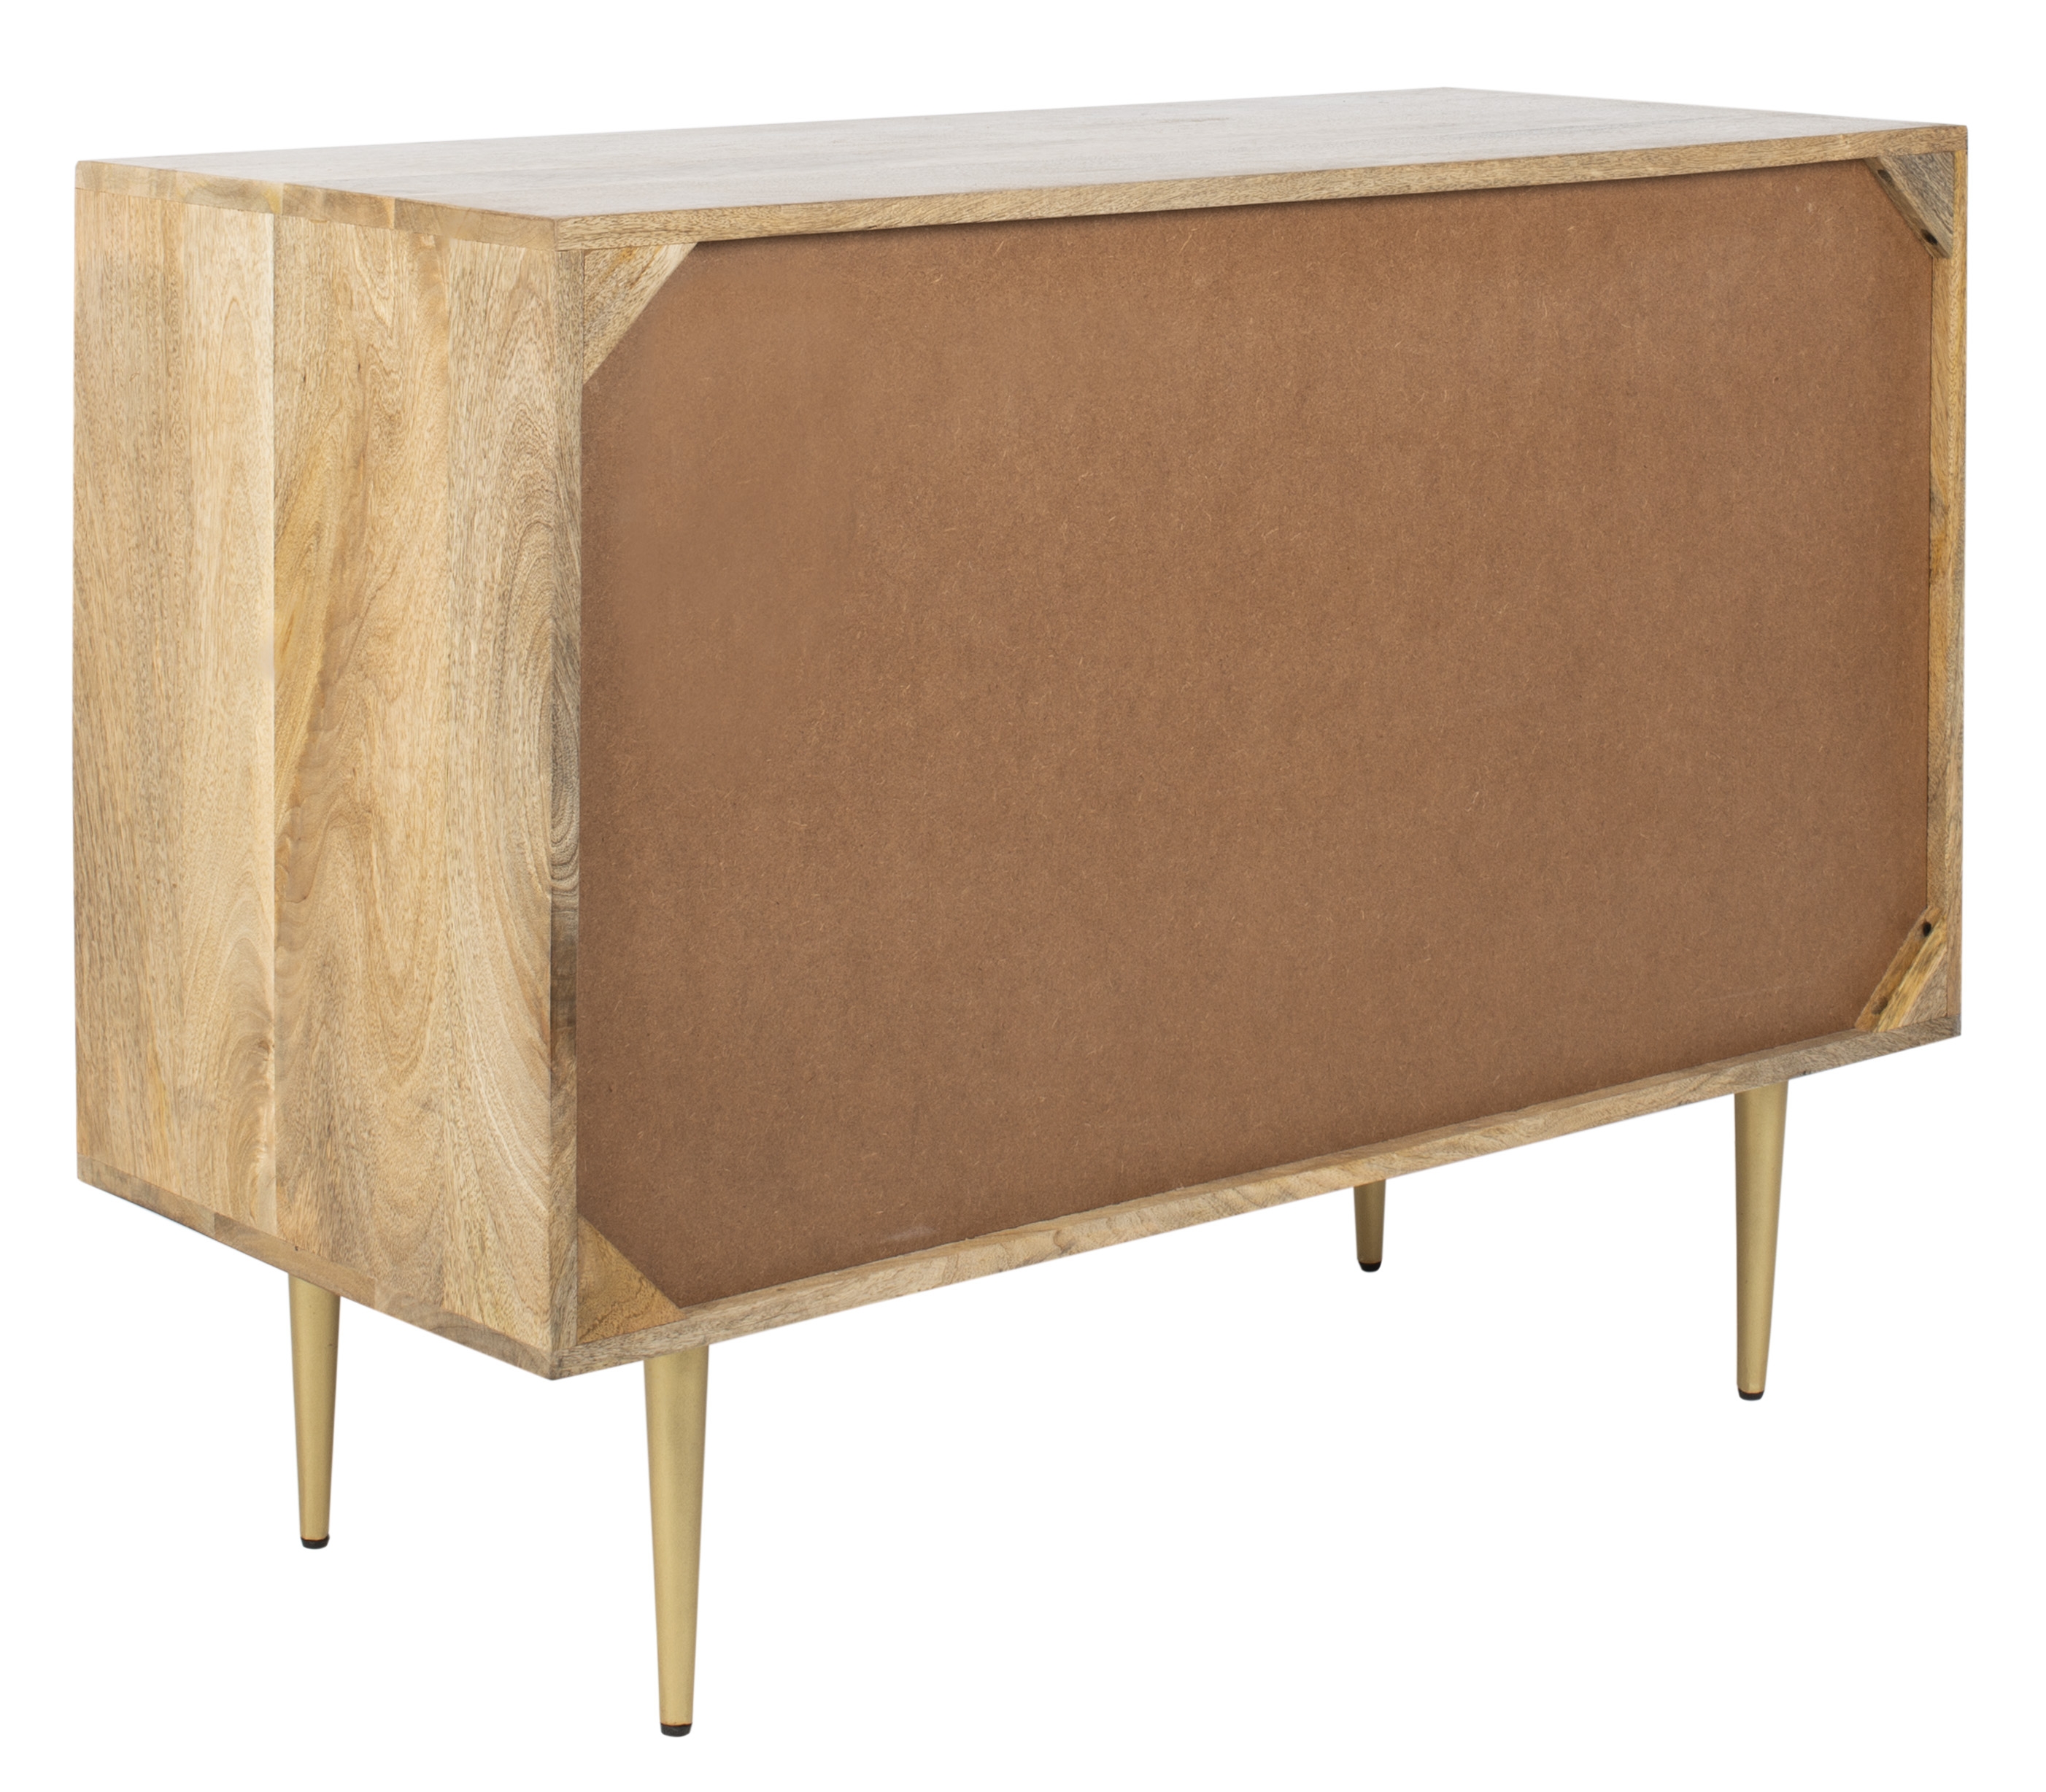 Titan Gold Inlayed Cement Chest - Natural Mango/Brass/Cement - Arlo Home - Image 1